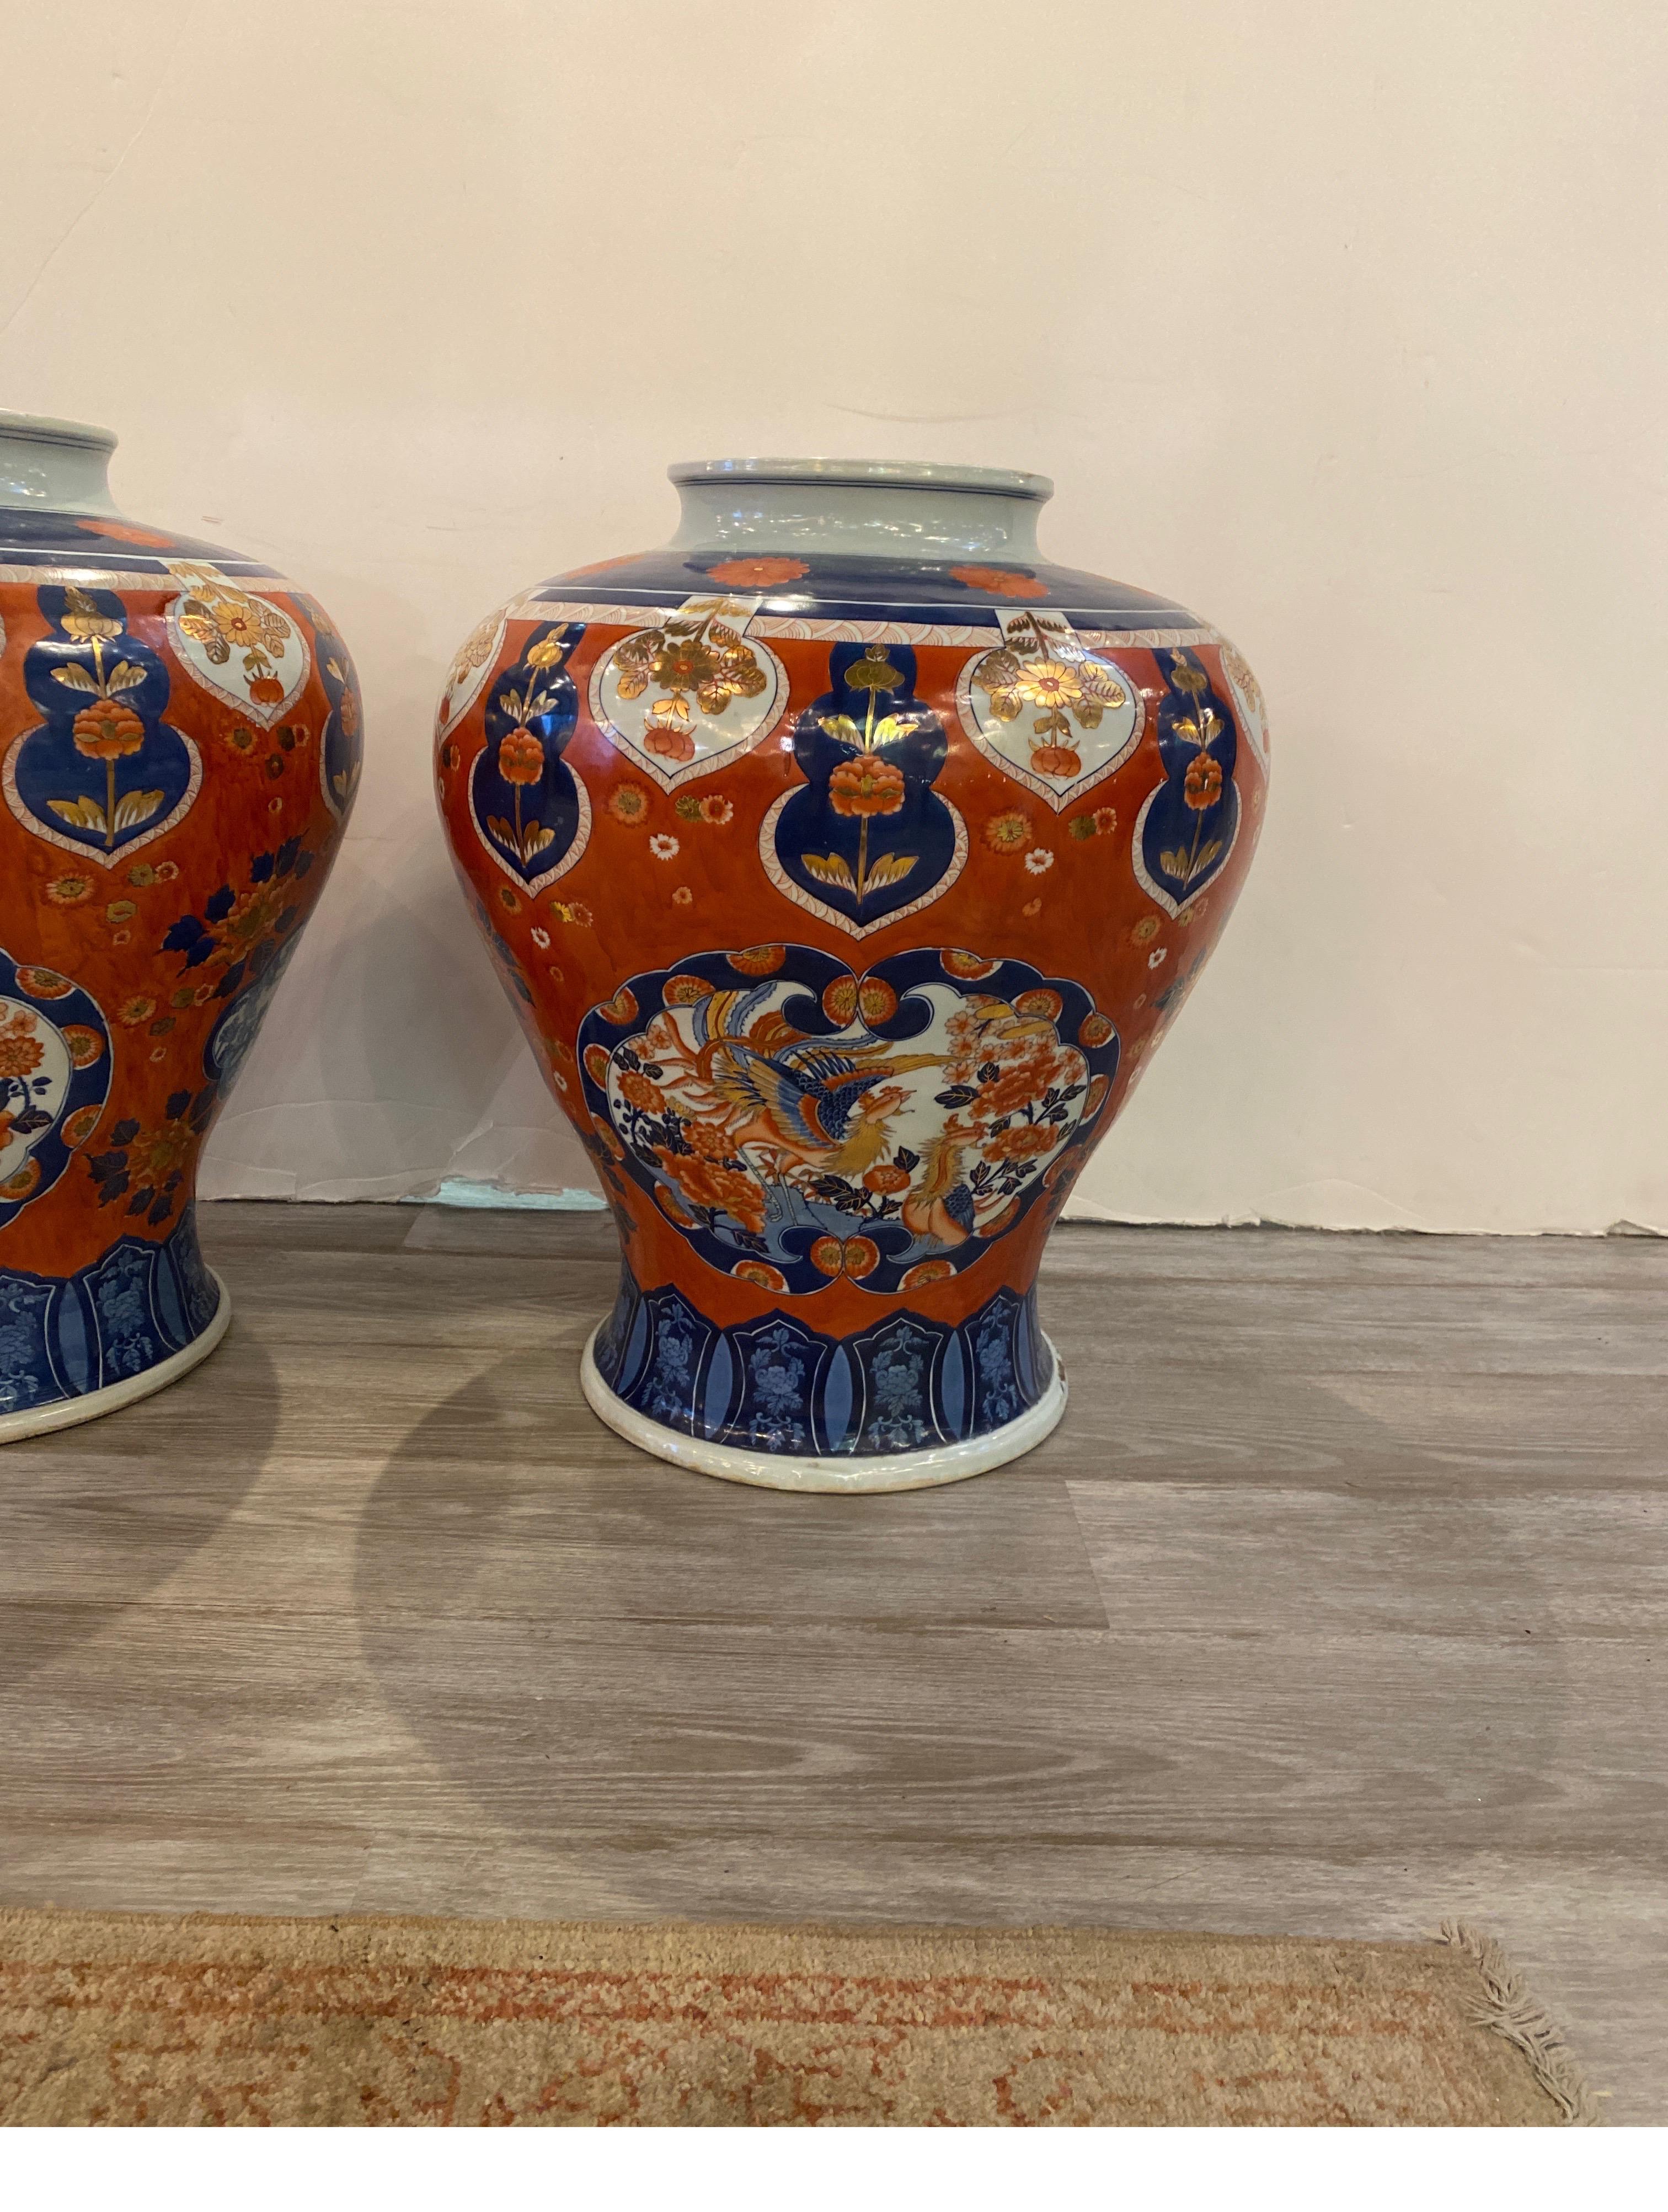 A pair of large Imari pattern porcelain jardinières in classic cobalt blue and iron red with gilt highlights. The white porcelain bulbous form vases all hand painted and an original pair. Beautifully hand painted with phoenix birds, peonies and